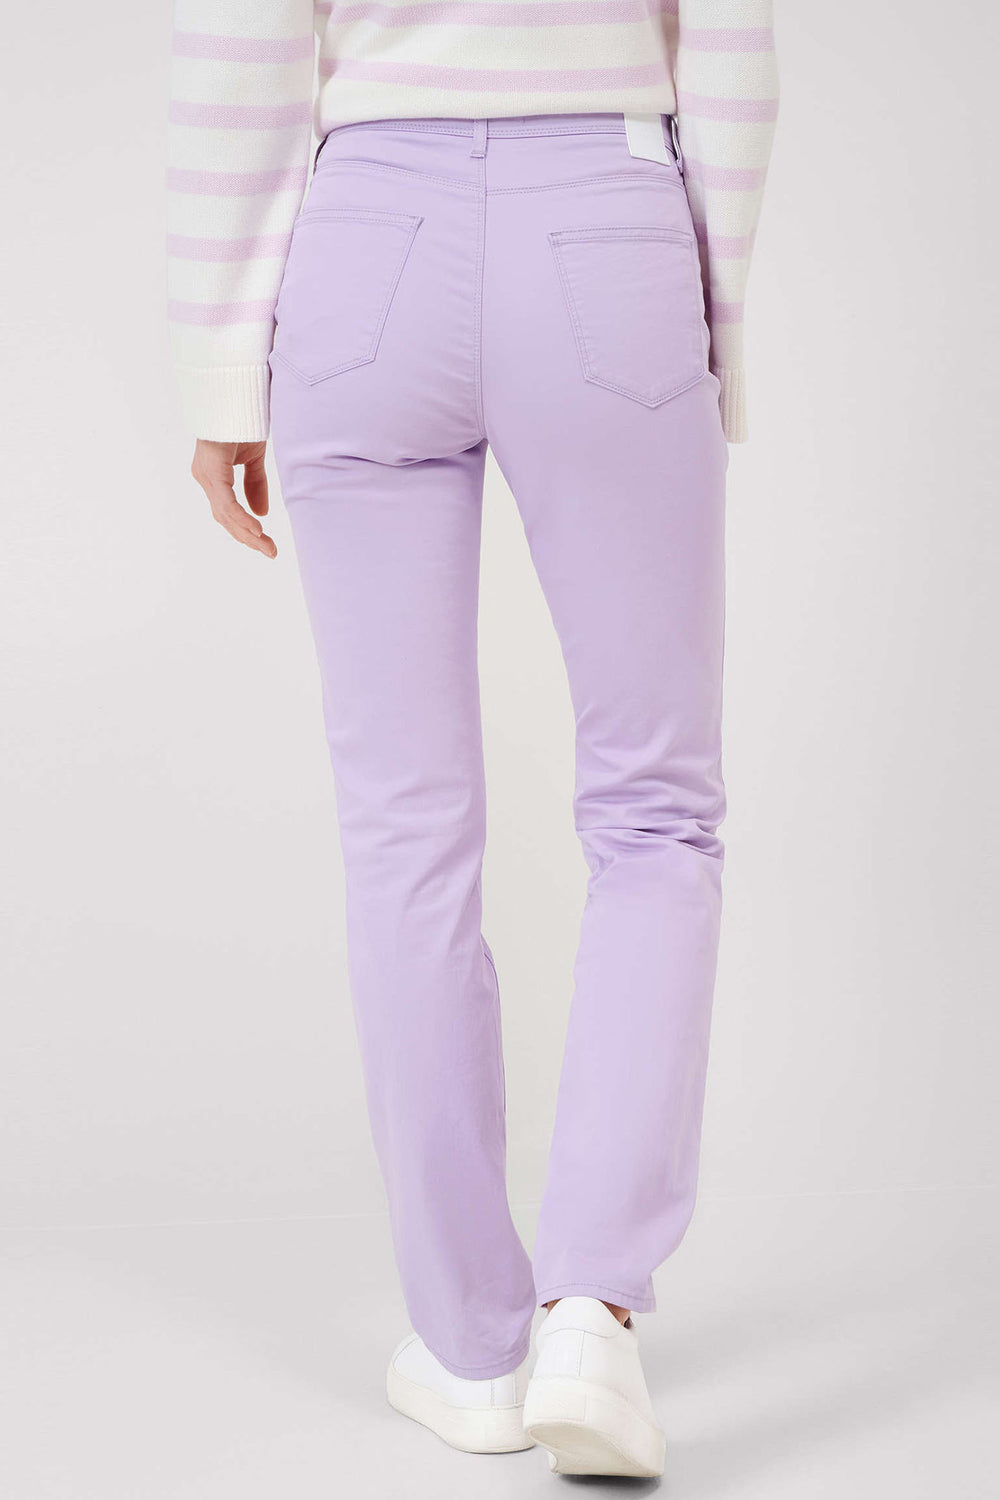 Brax Mary 71-1458 09859420 83 Pale Lilac Five Pocket Jeans - Shirley Allum Boutique